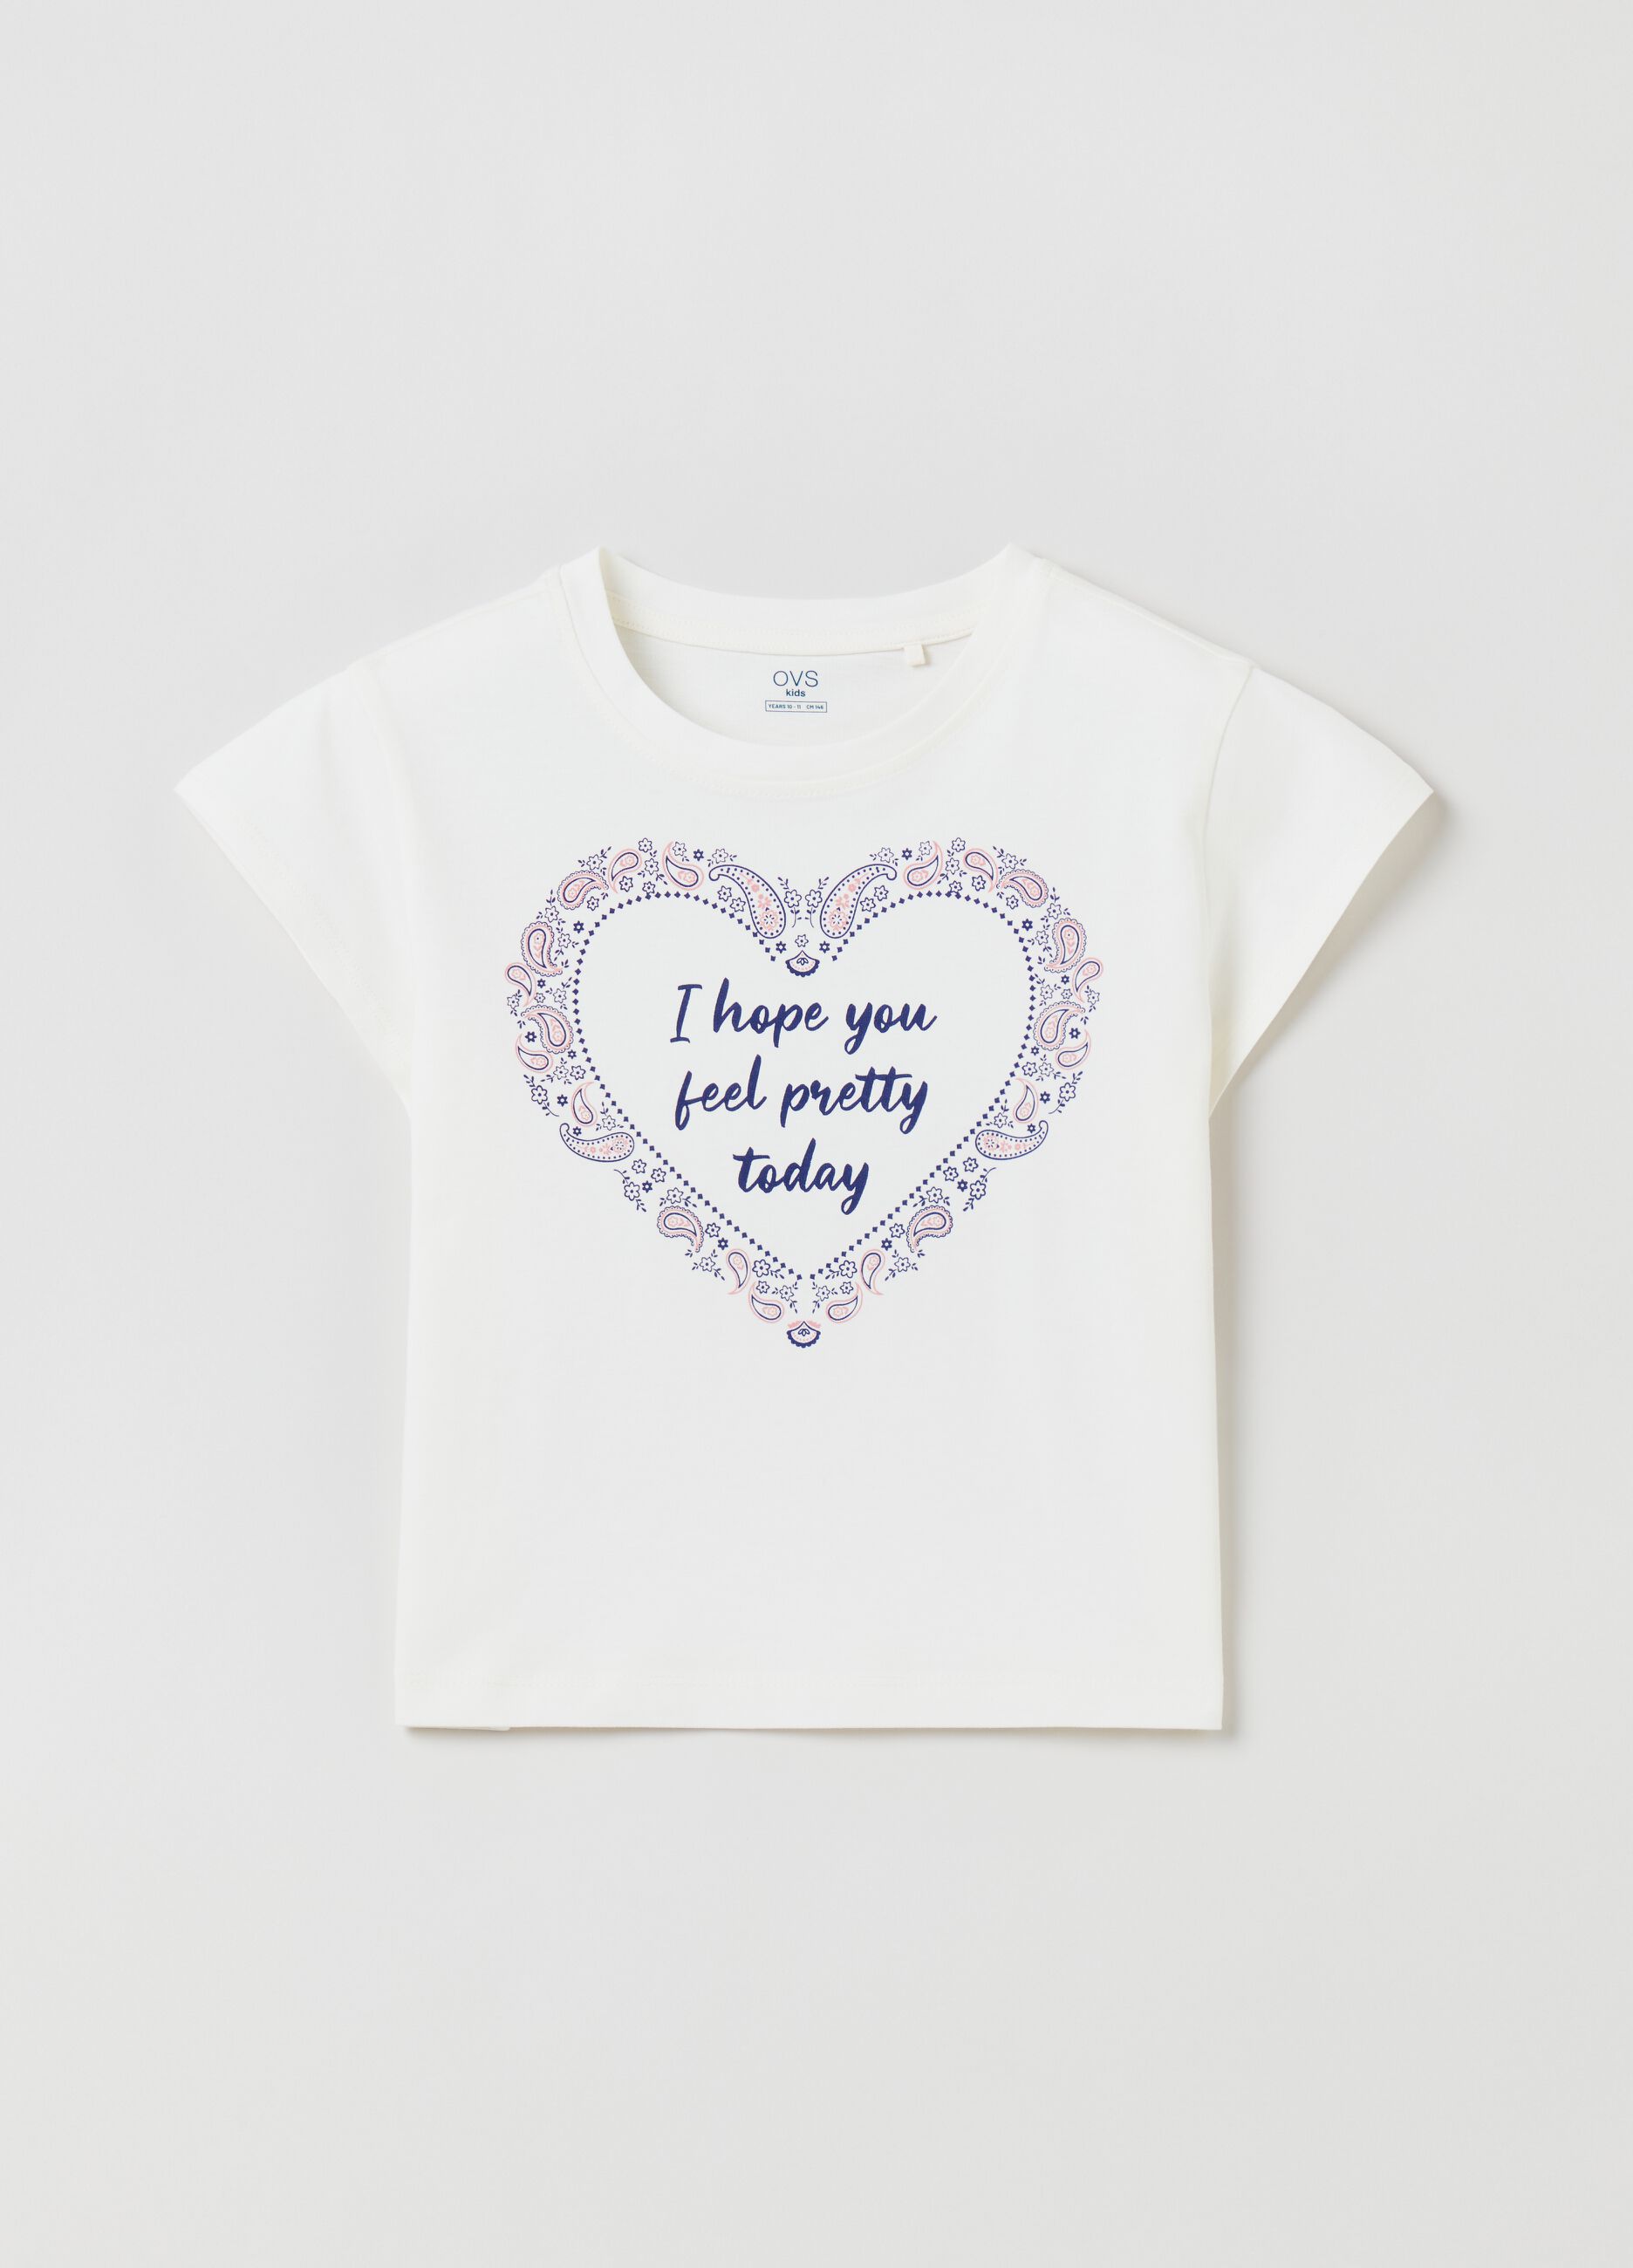 Cotton T-shirt with paisley designs